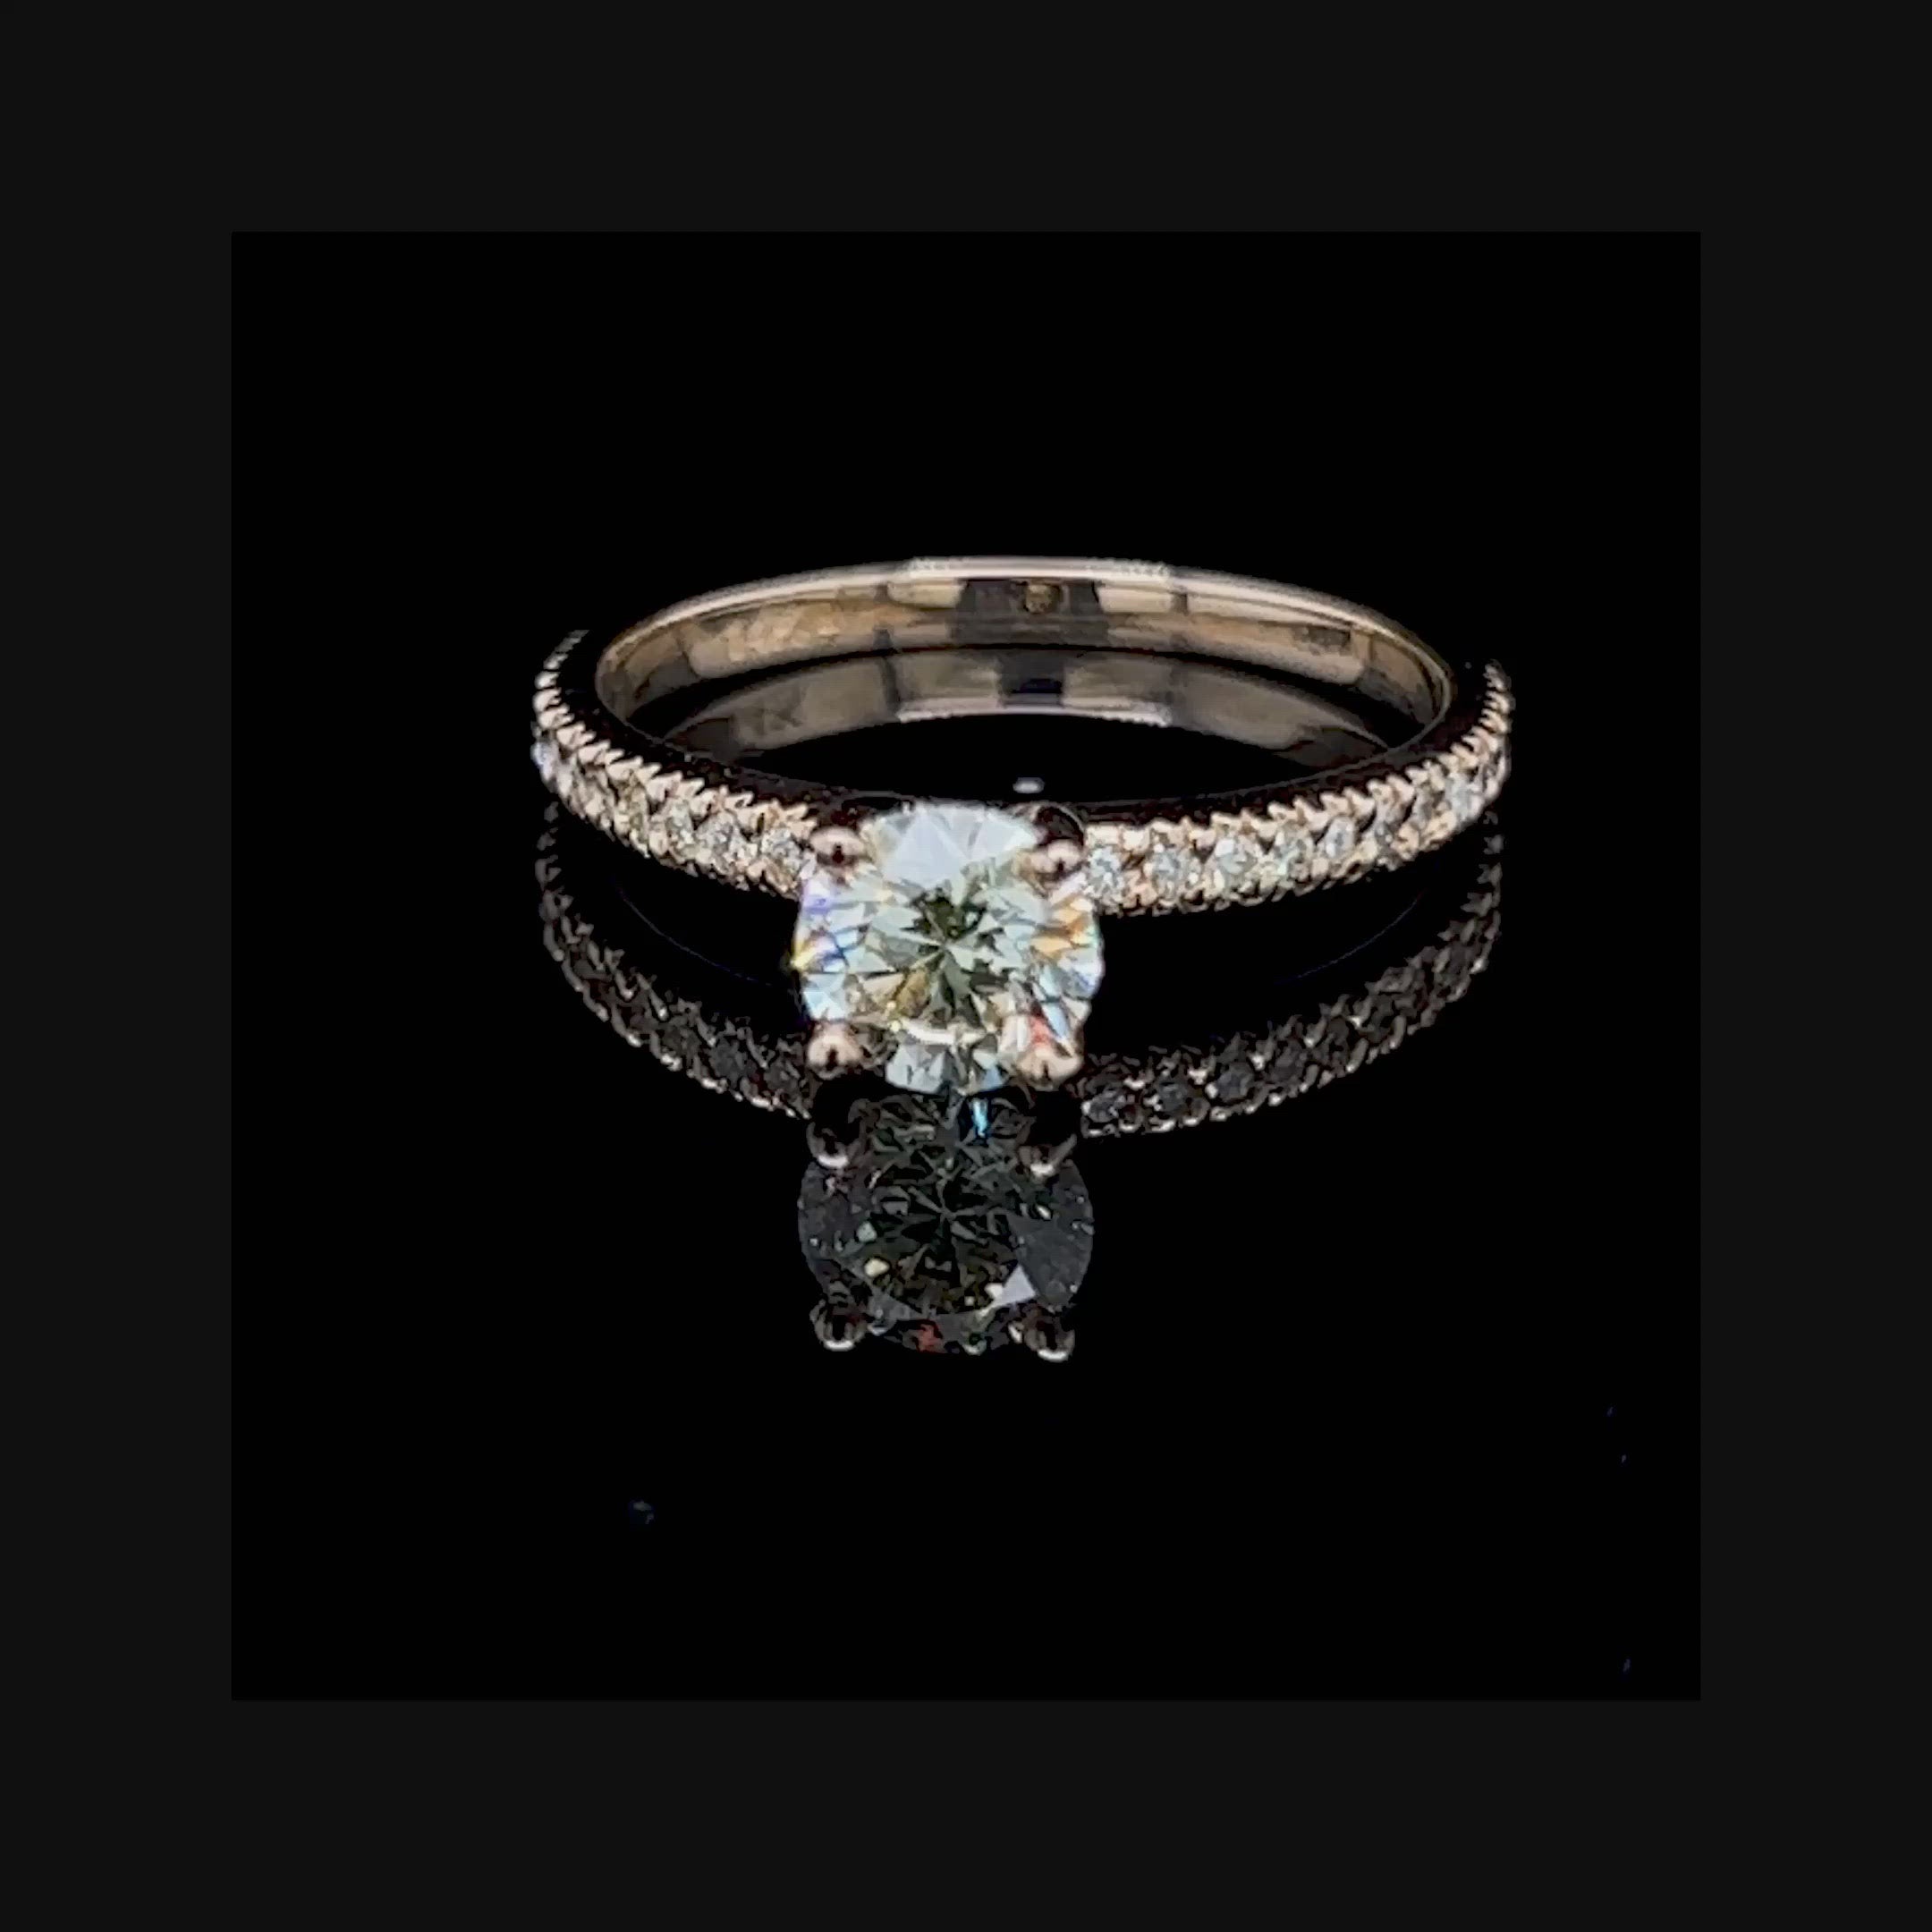 Rare 1.00CT Round Cut Diamond Engagement Ring in 14KT Yellow Gold